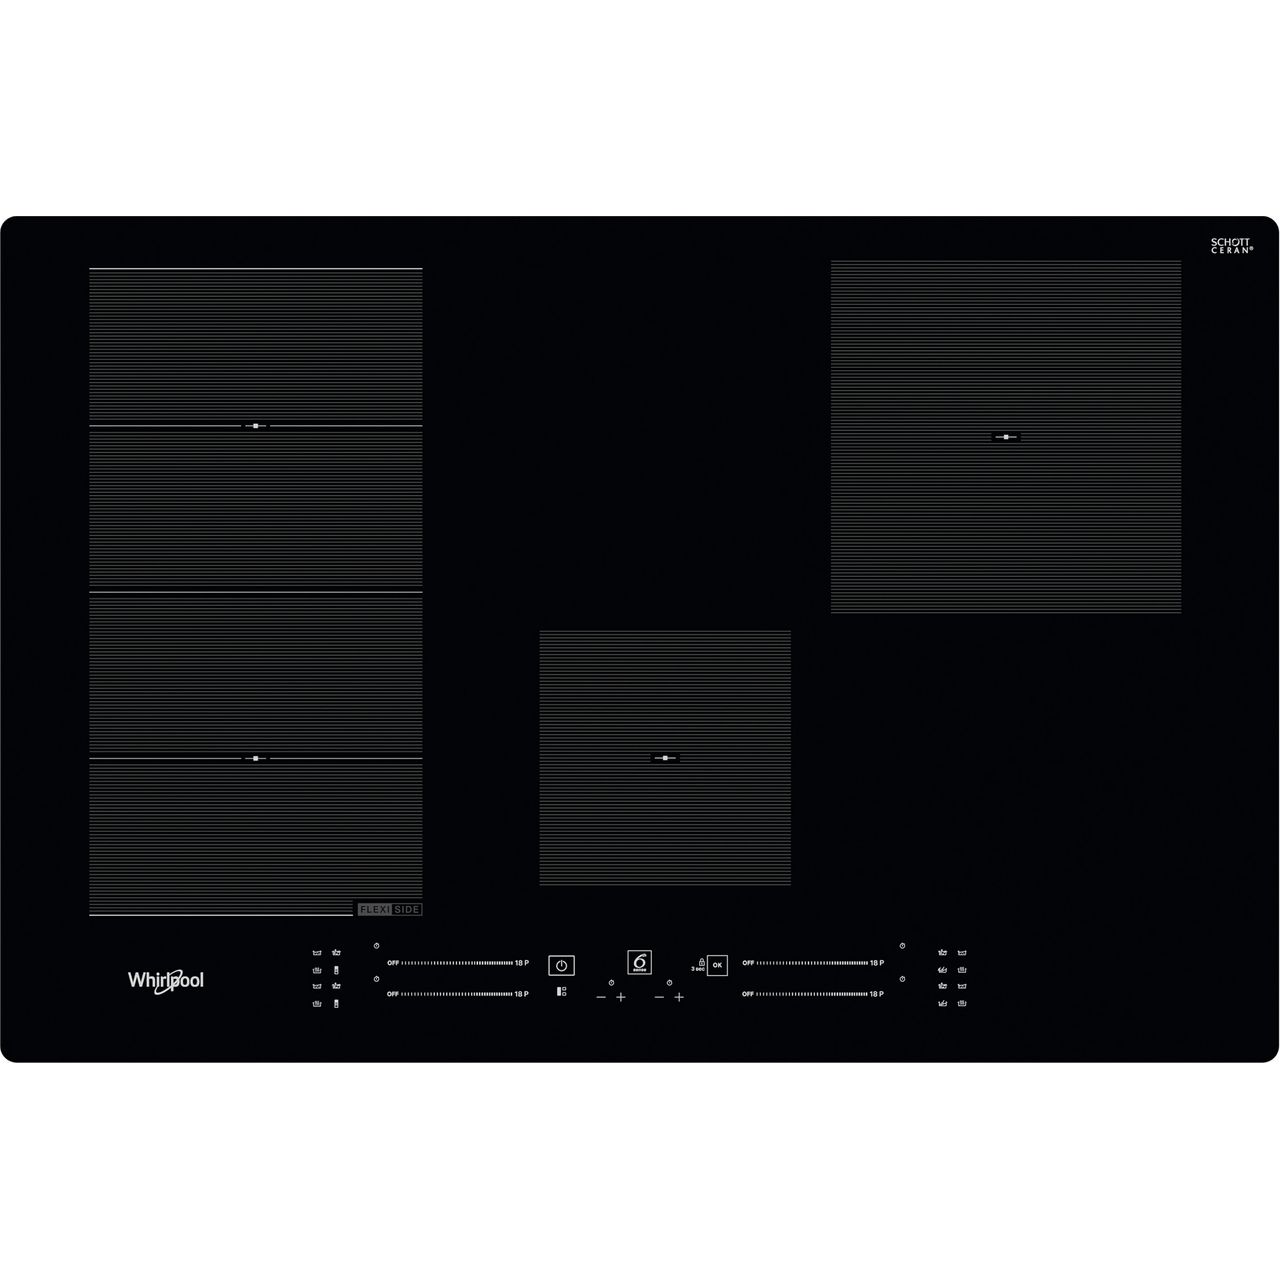 Whirlpool WFS3977NE 85cm Induction Hob Review